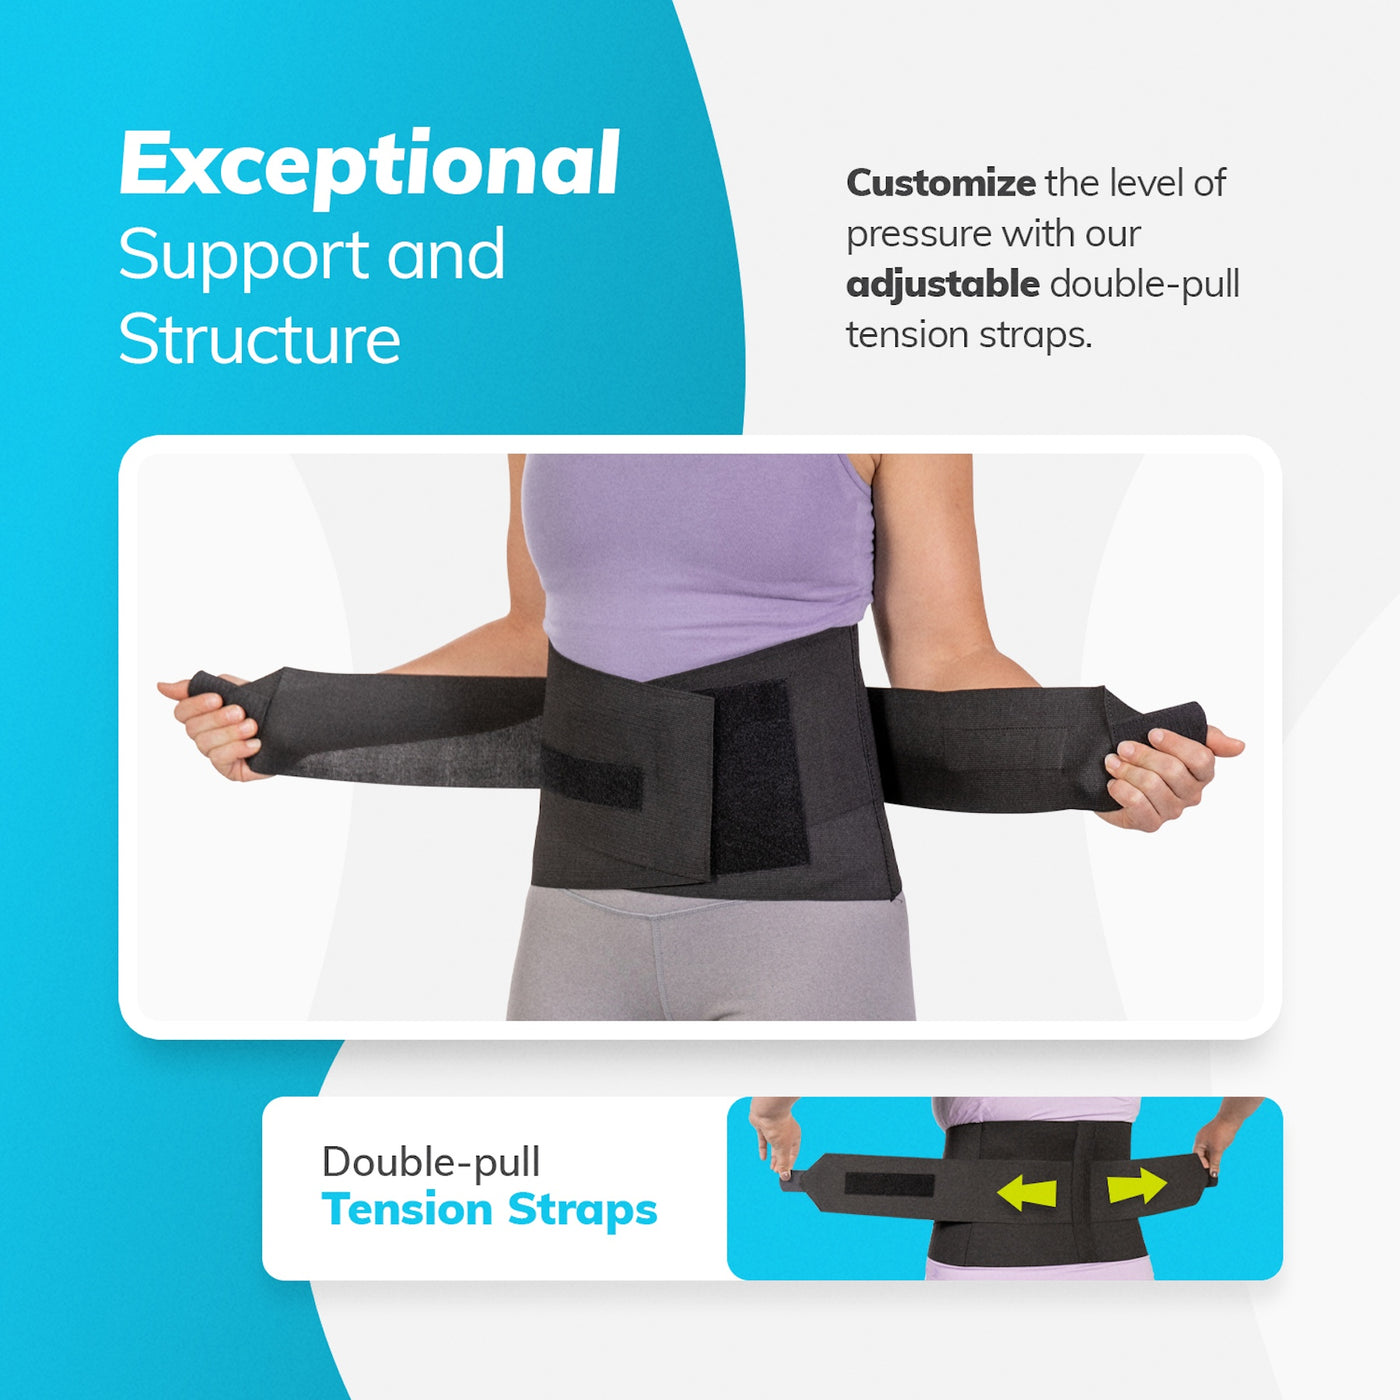 Double-pull tension straps provide sciatic nerve pain relief. The back support can be worn under clothes